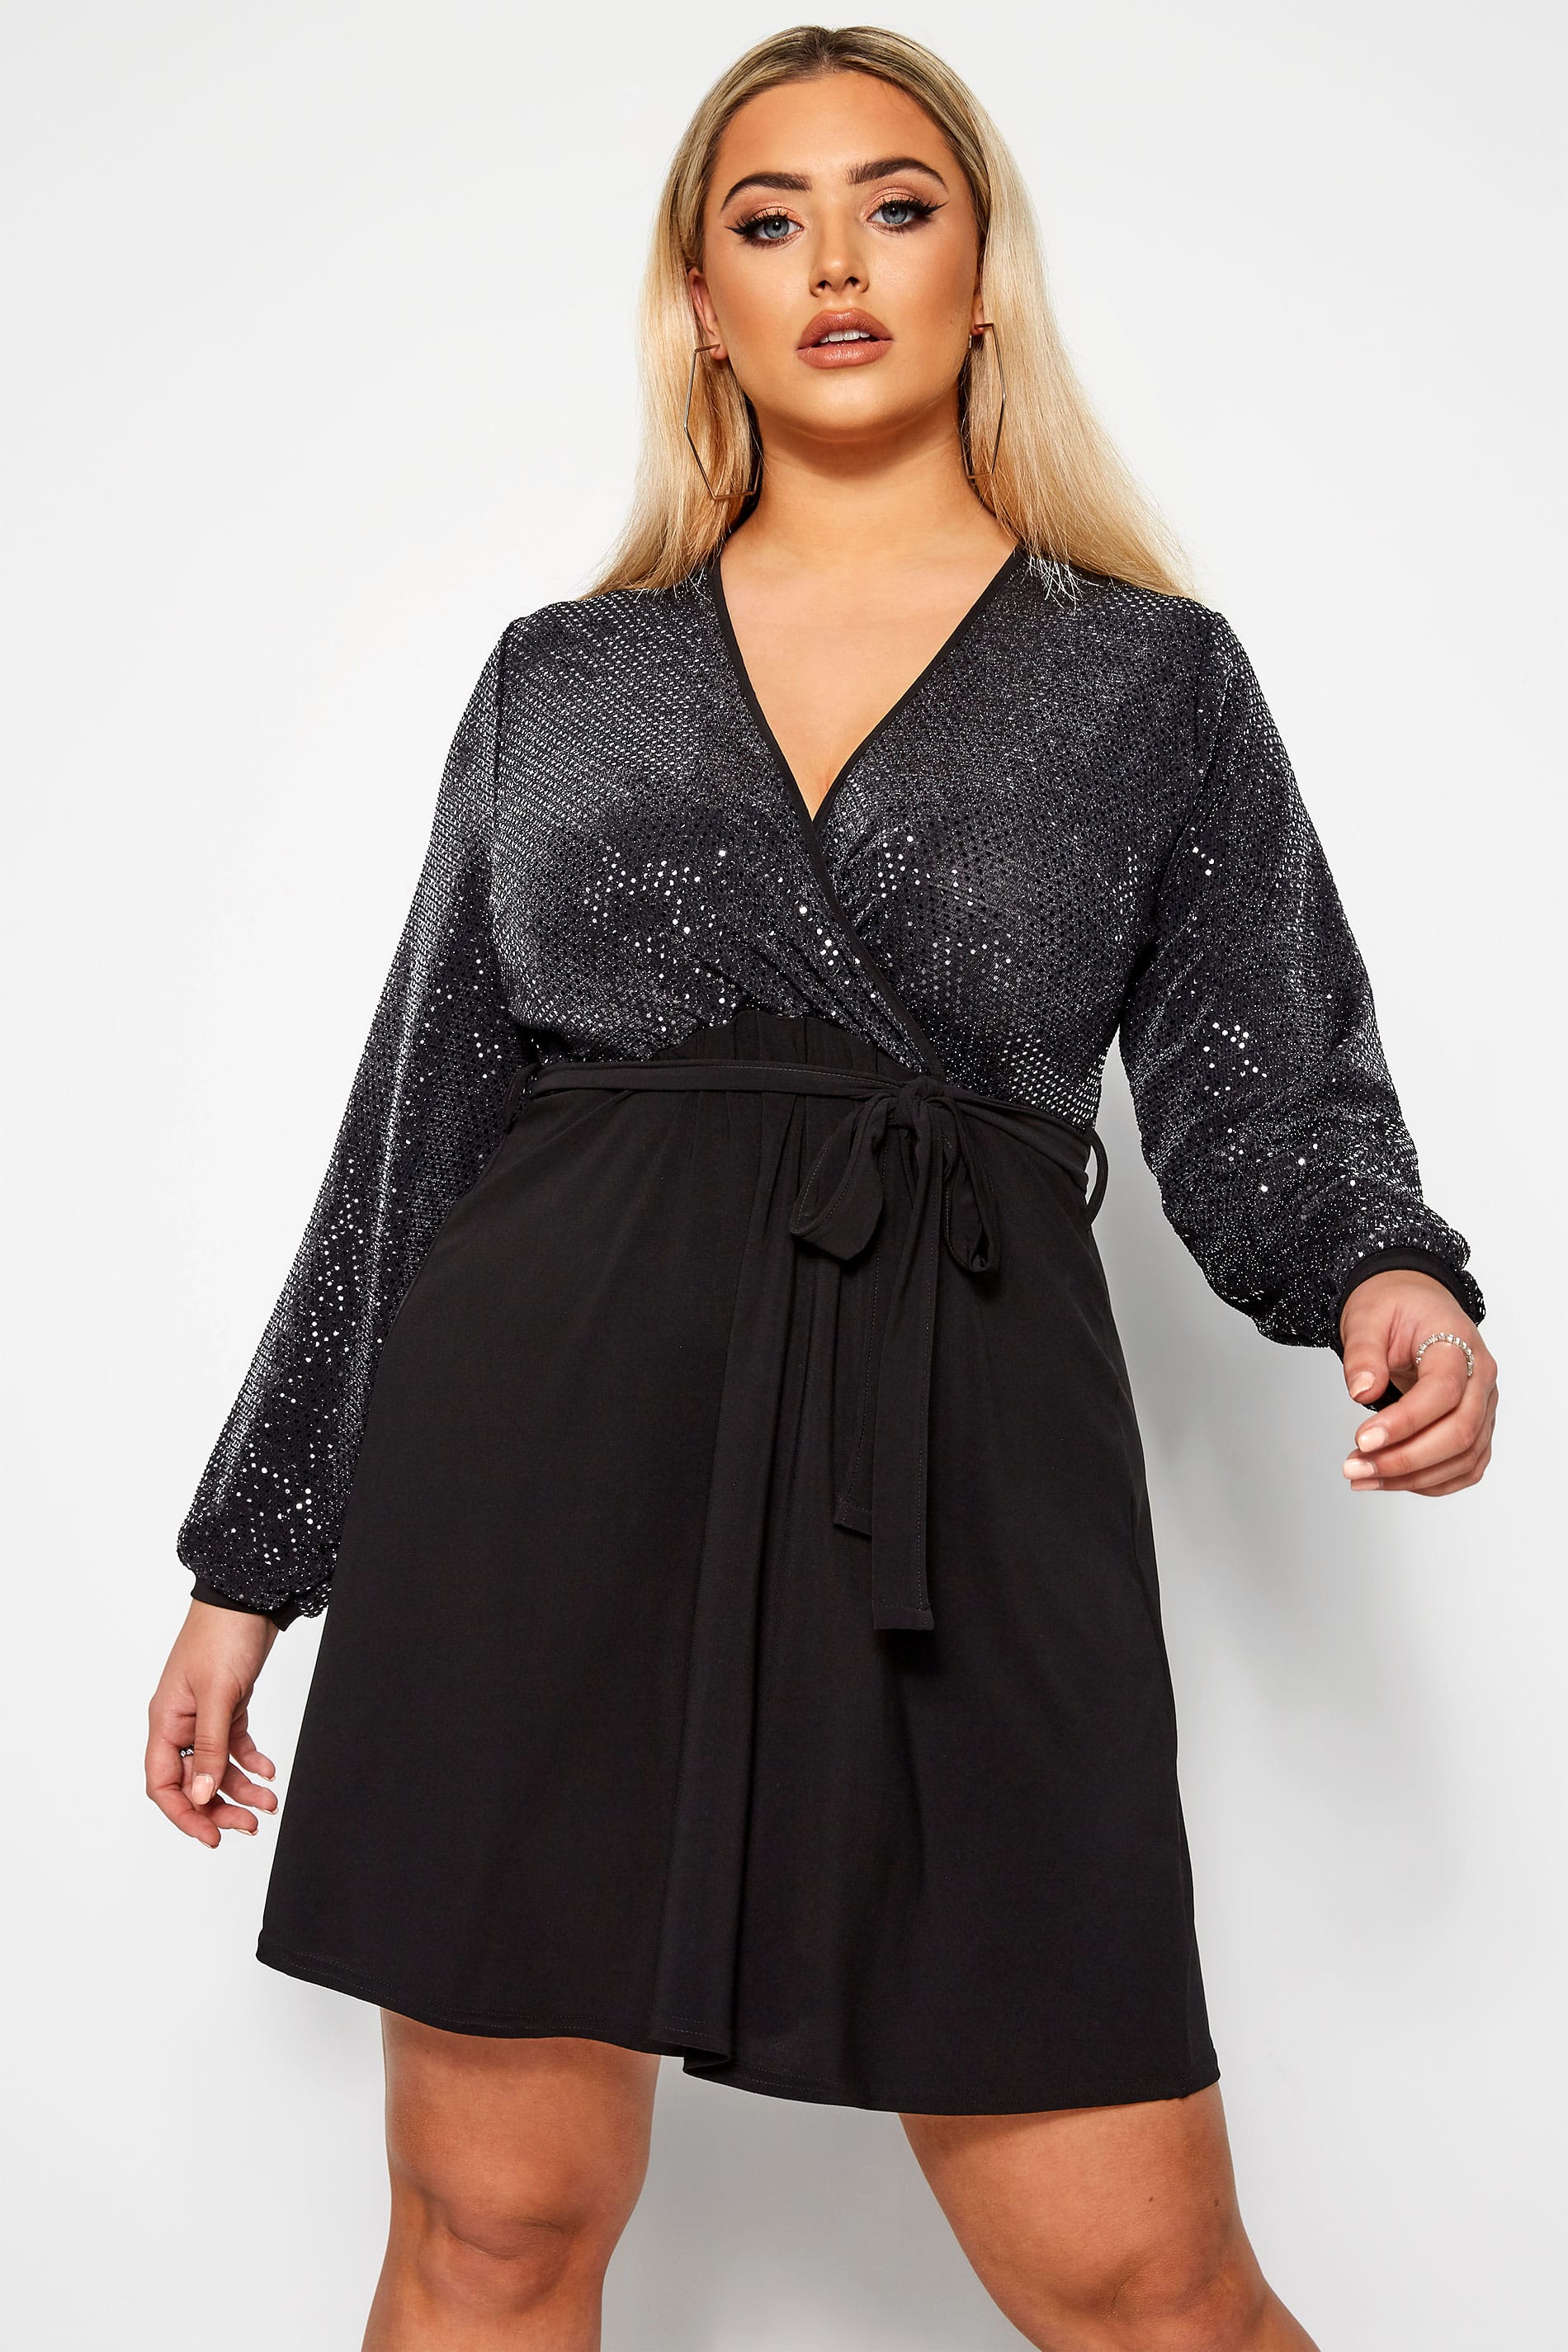 LIMITED COLLECTION Black & Silver Sequin Dress | Yours Clothing